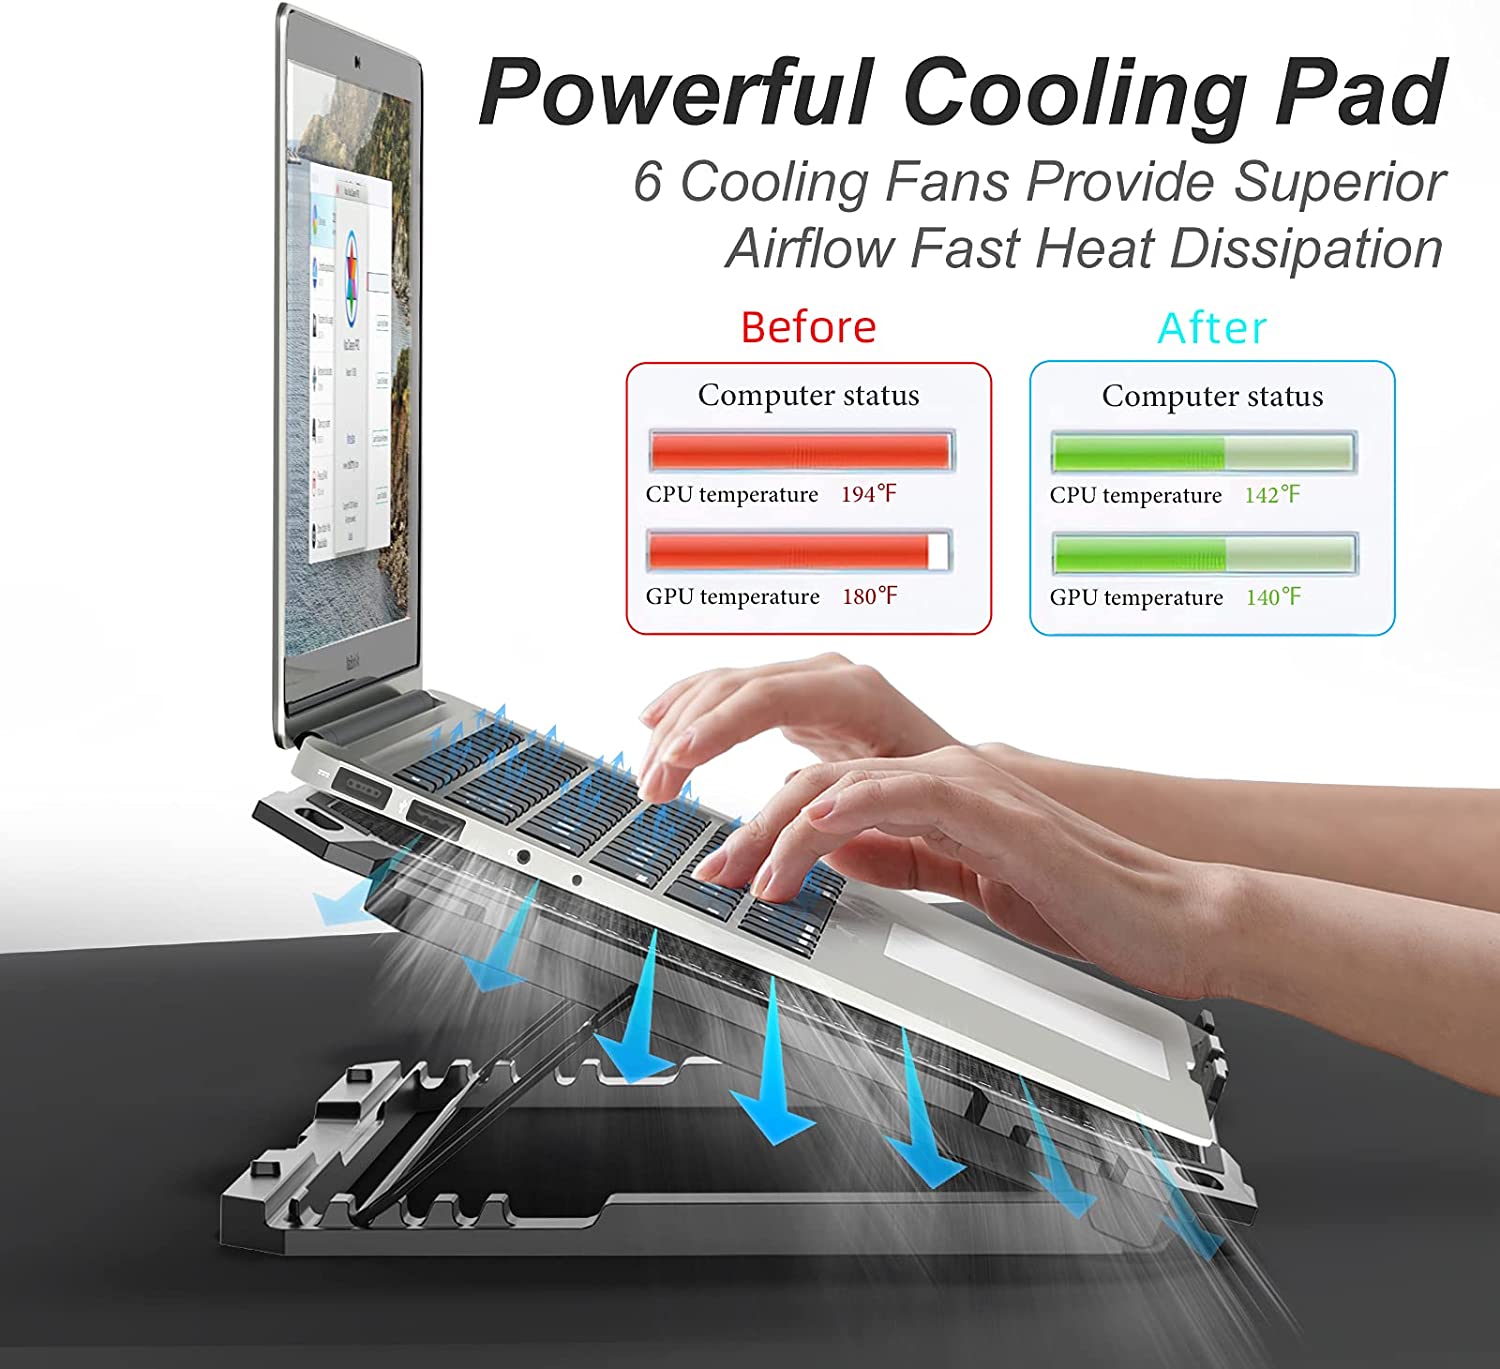 Laptop-Accessories-Laptop-Cooling-Pad-Gaming-Laptop-Stand-Cooler-Pad-with-6-Cooling-Fans-Notebook-Riser-with-6-Adjustable-Height-2-USB-Port-for-11-17-3-Inch-Laptop-7